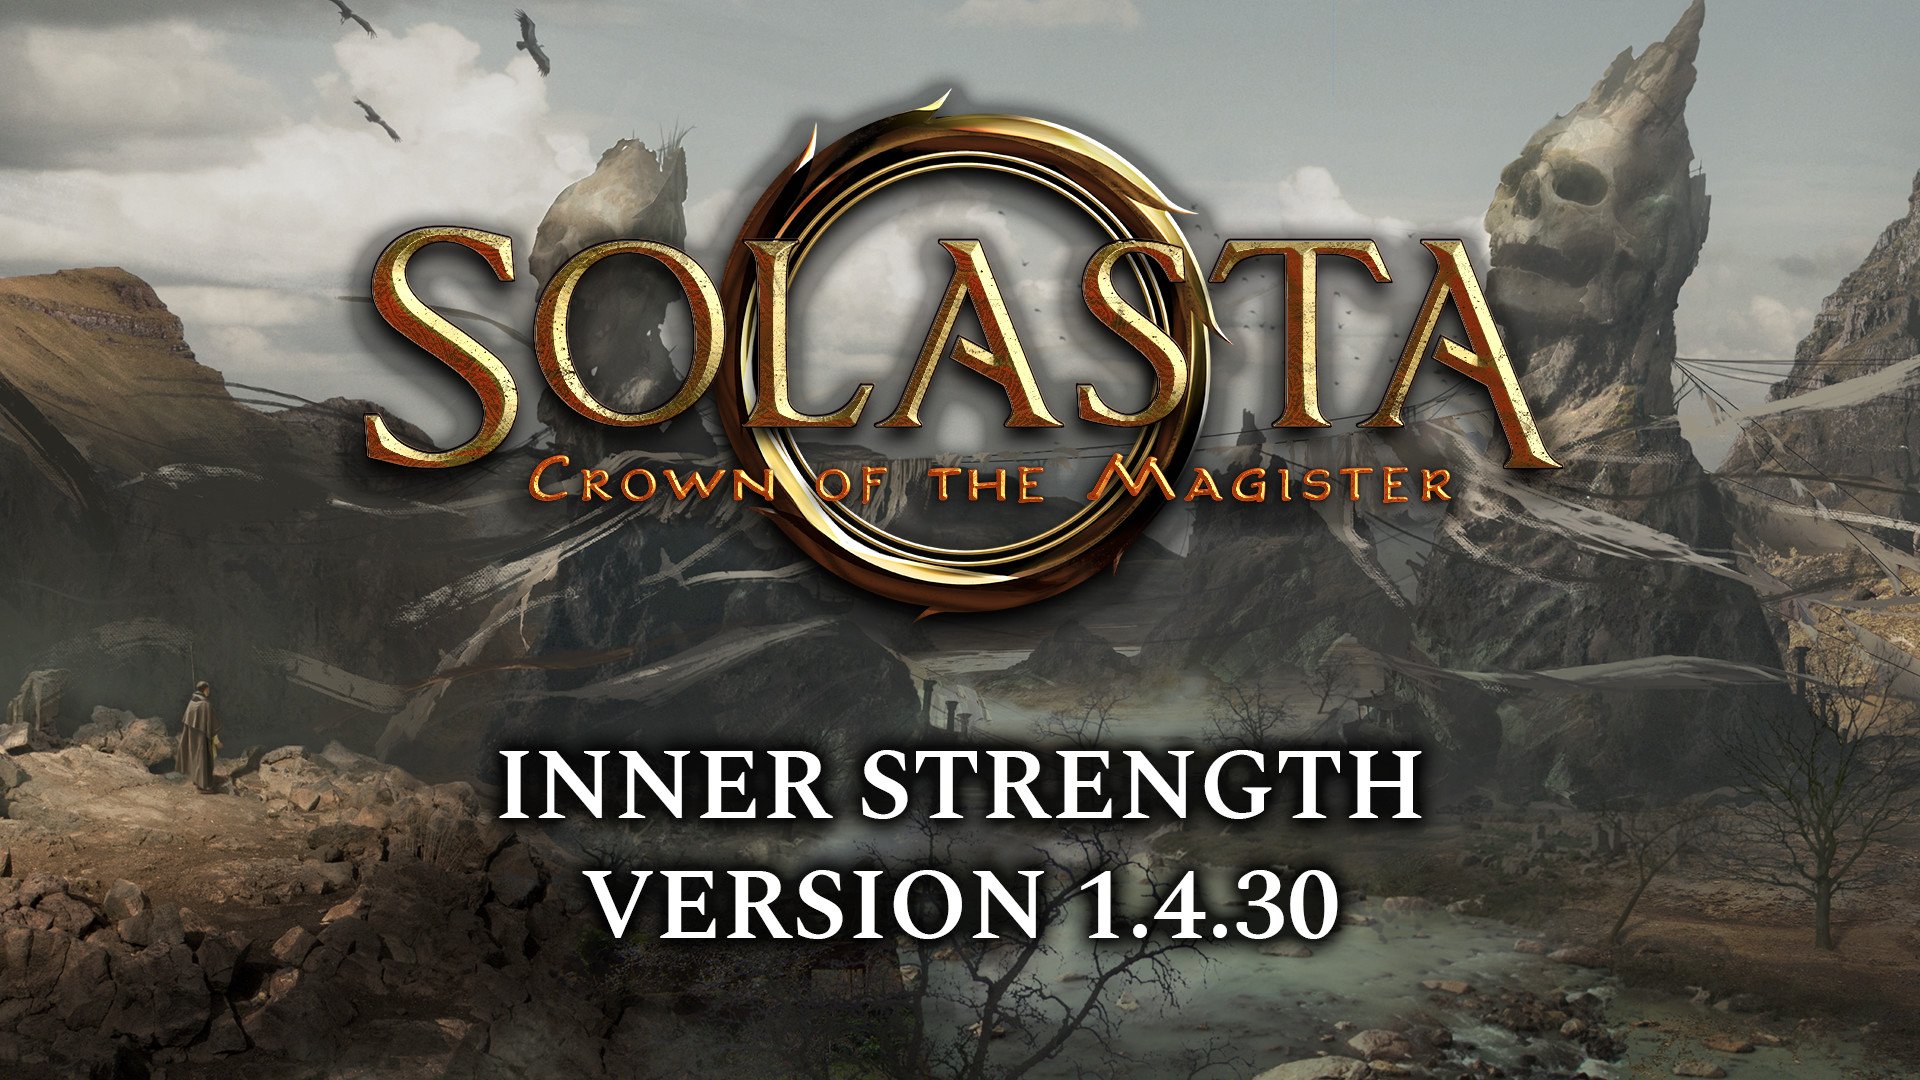 Inner Strength Patch Notes - Version 1.4.30